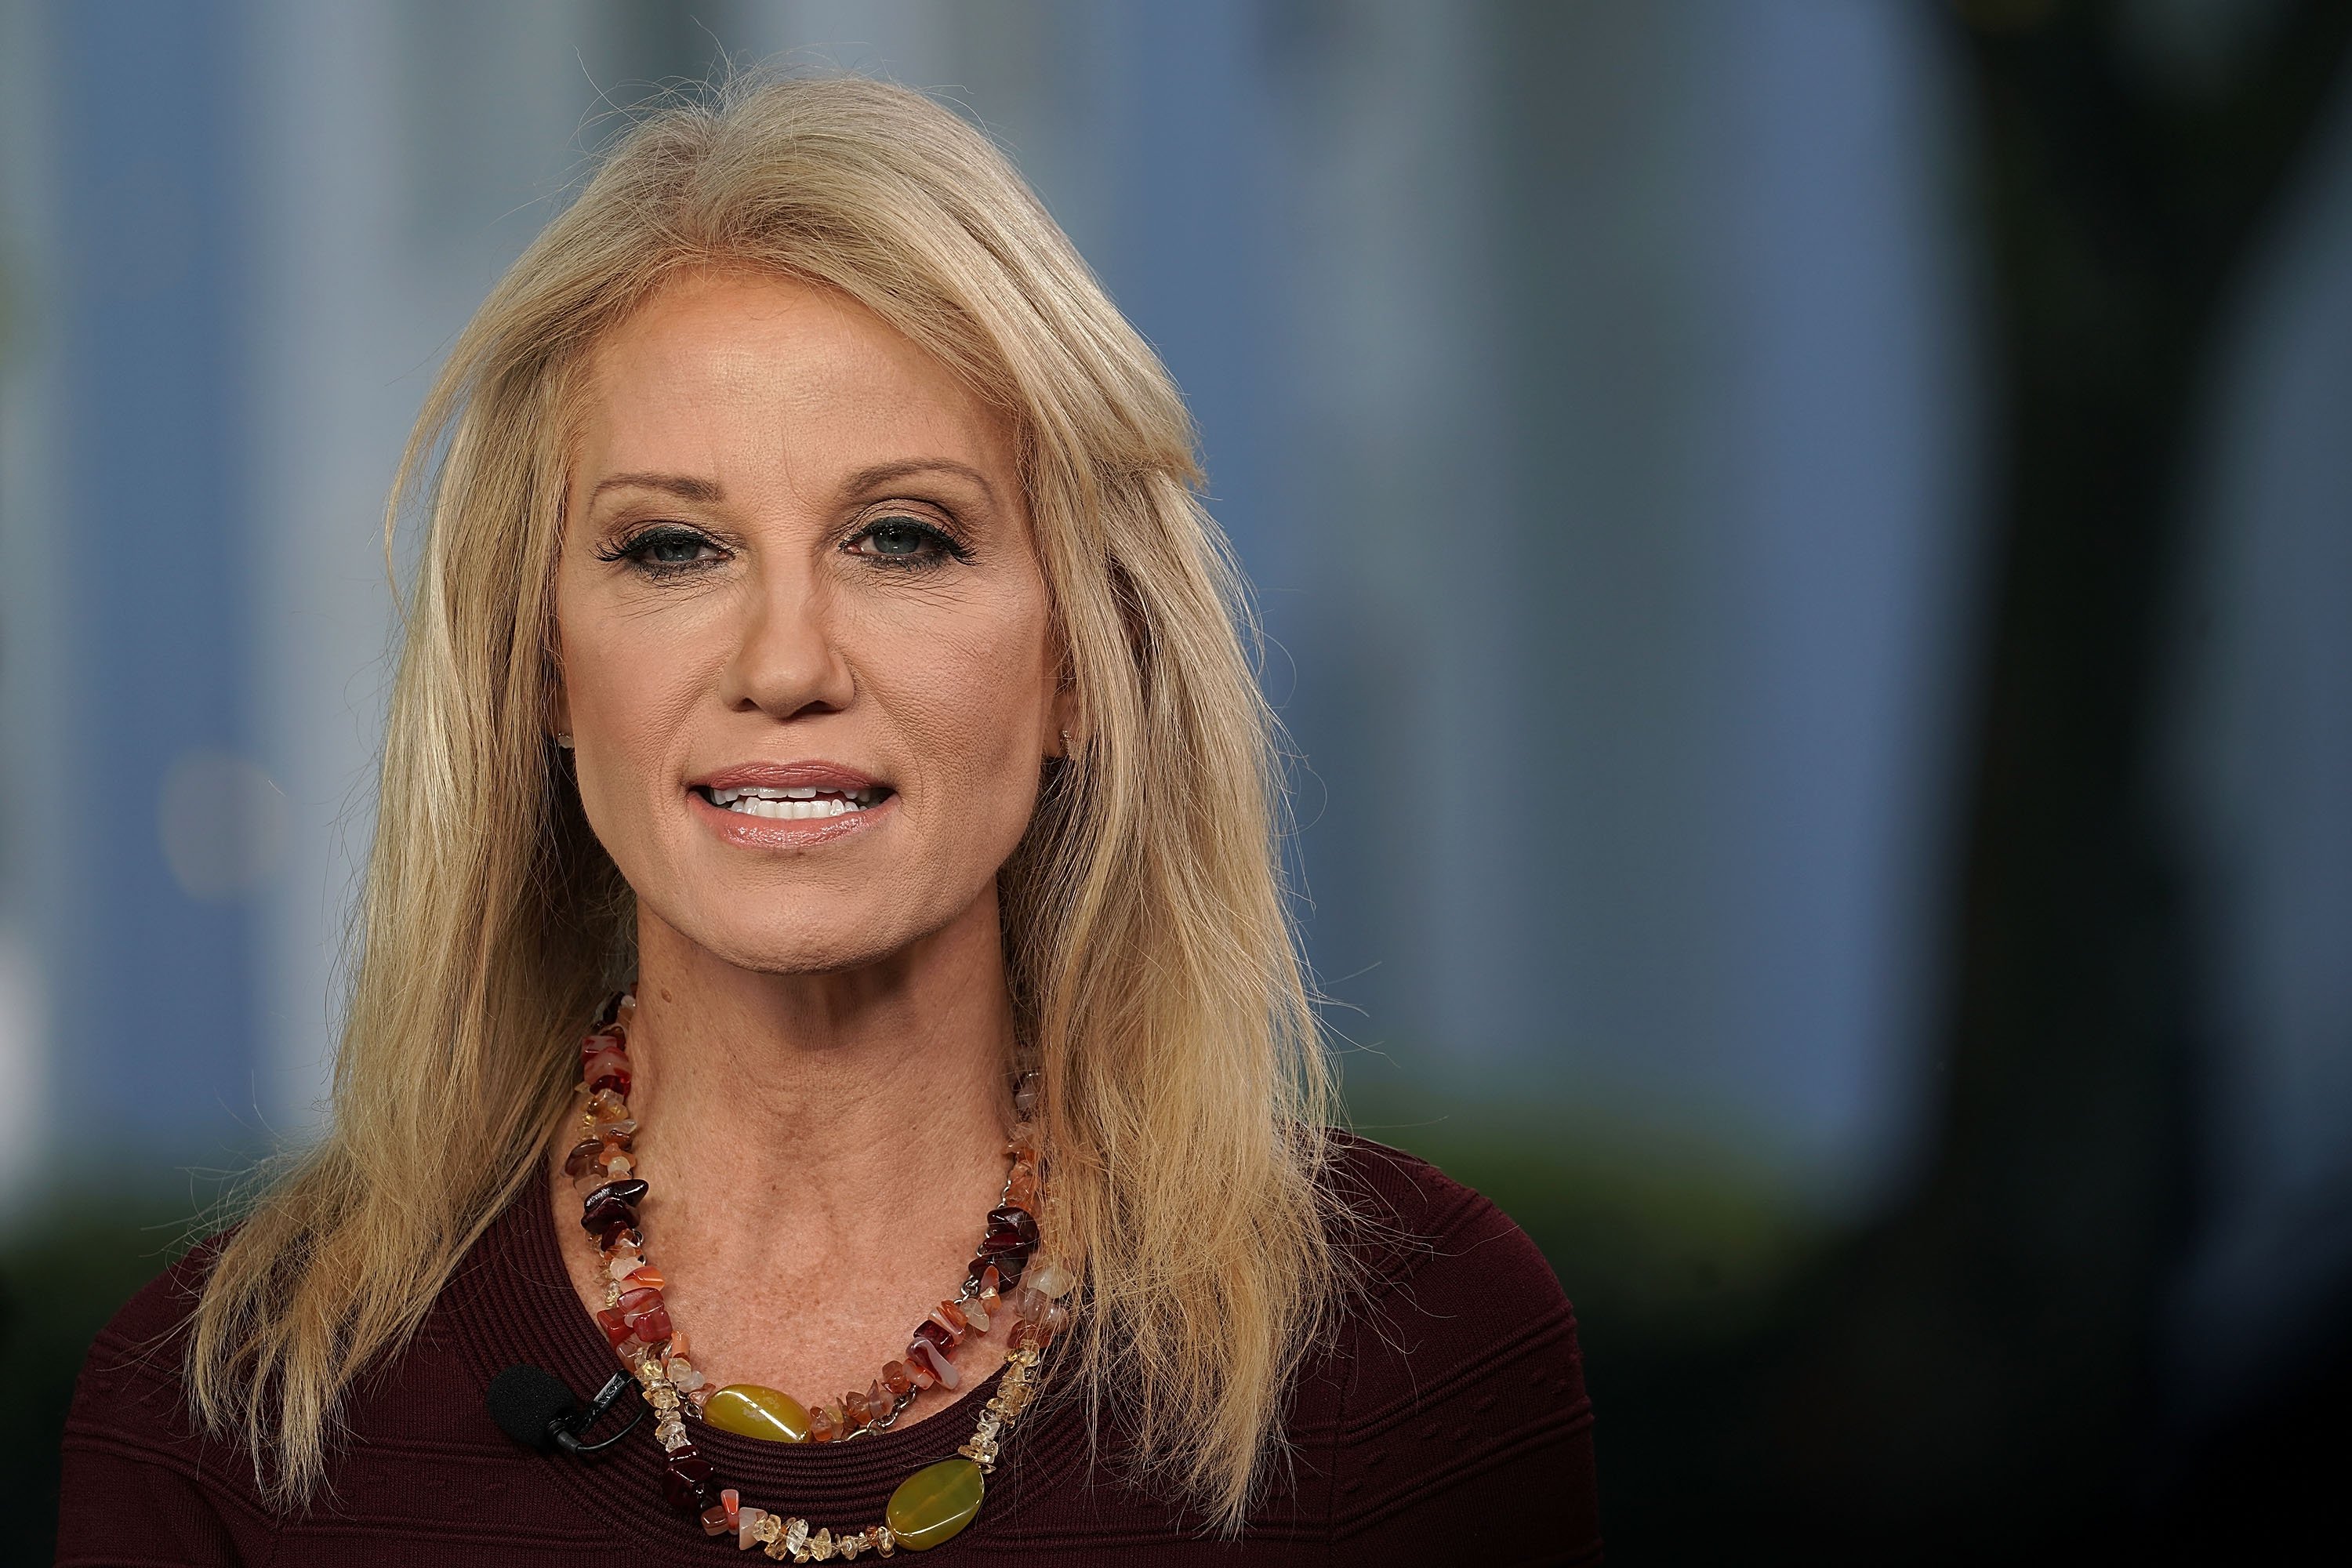 Counselor to US President Donald Trump, Kellyanne Conway, participates in a TV interview on October 3, 2018 at the White House in Washington, DC | Photo: Getty Images